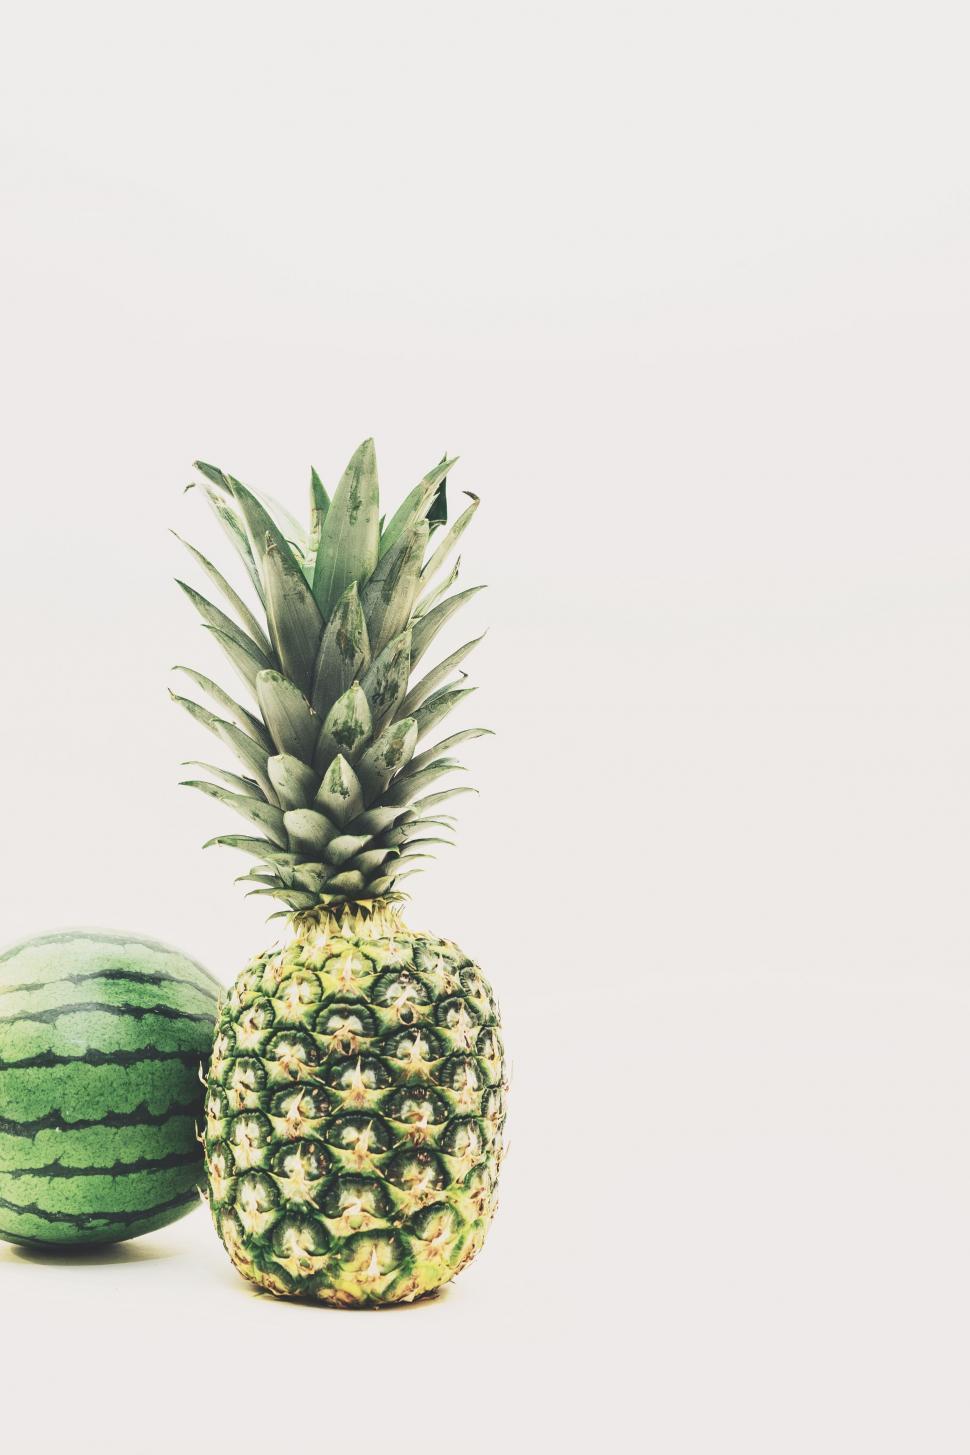 Free Image of Pineapple and Watermelon  